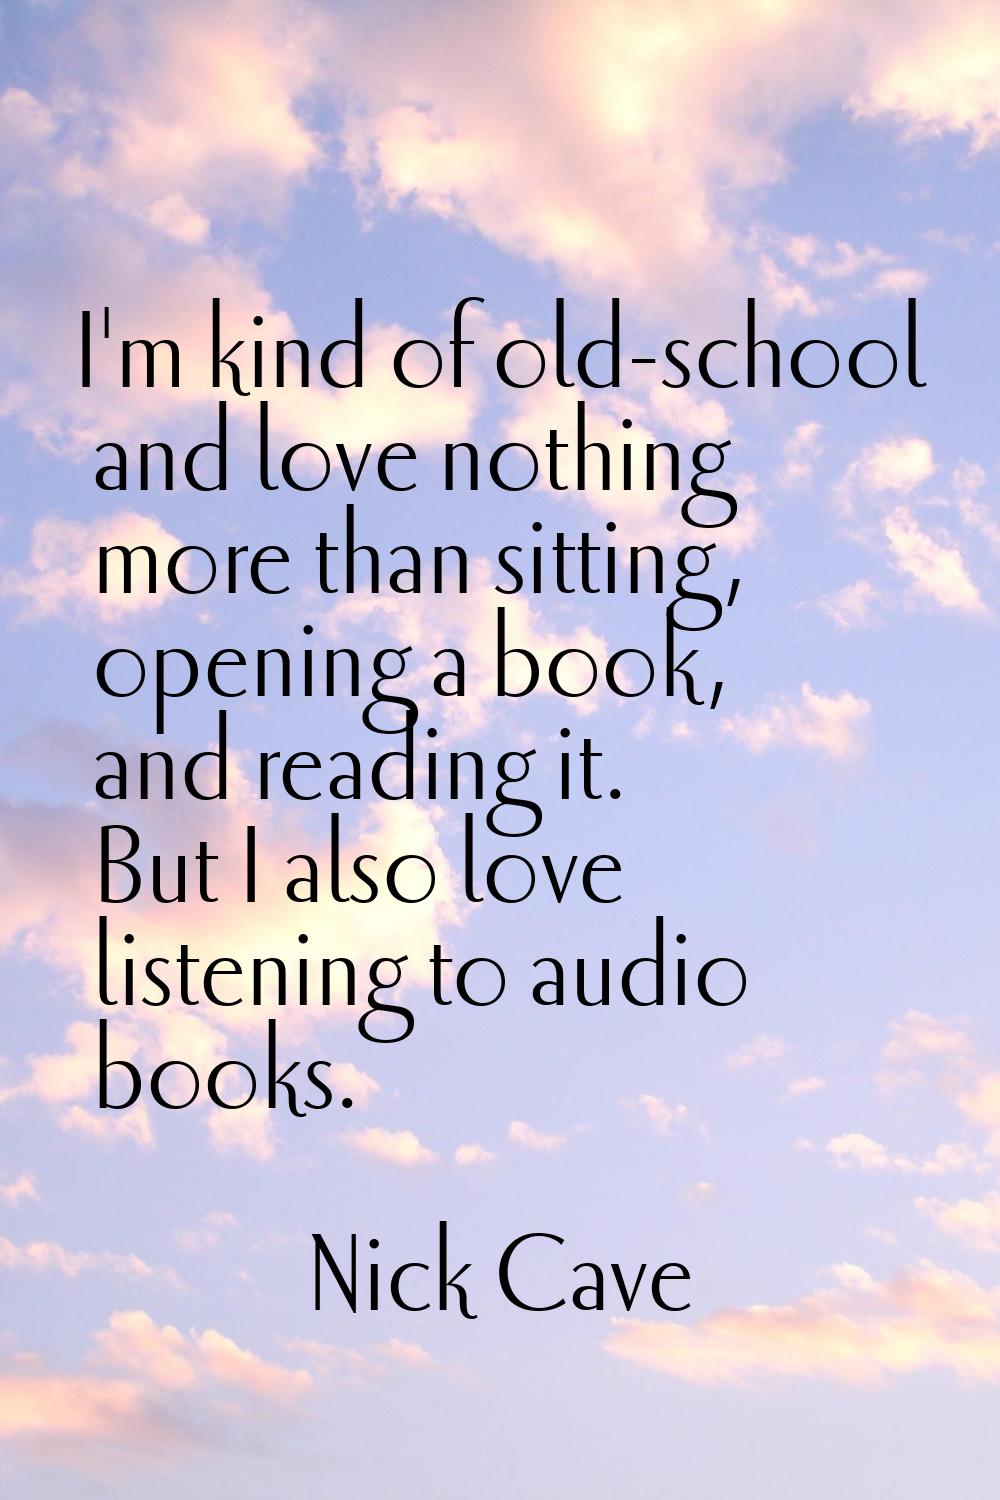 I'm kind of old-school and love nothing more than sitting, opening a book, and reading it. But I al